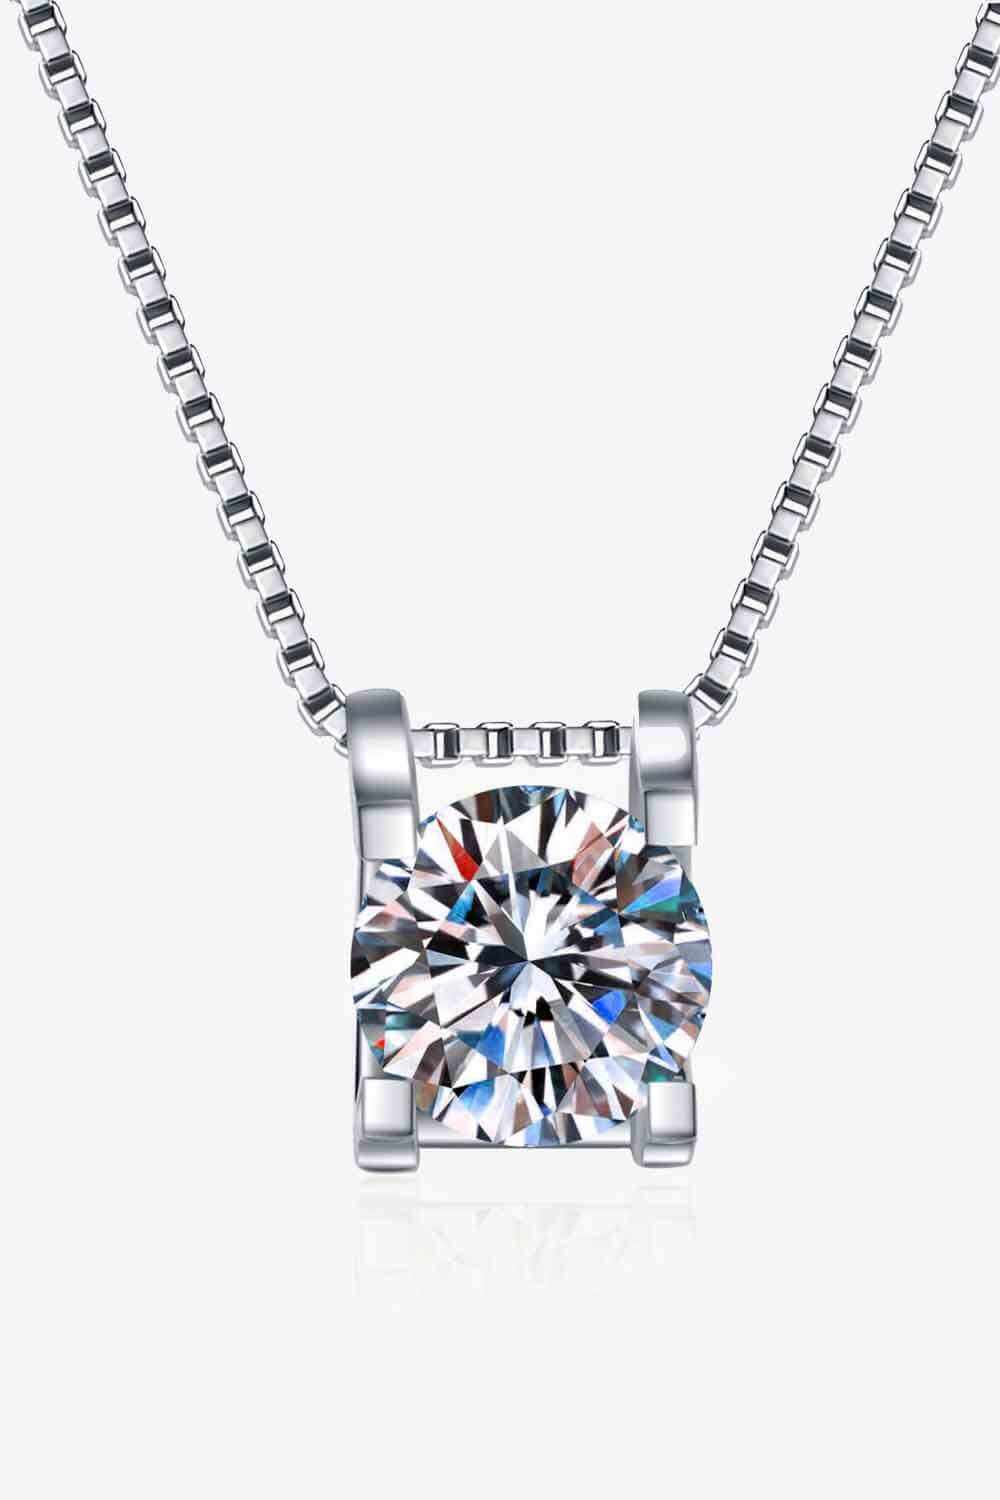 1 Carat Moissanite Necklace, 925 Sterling Silver Chain